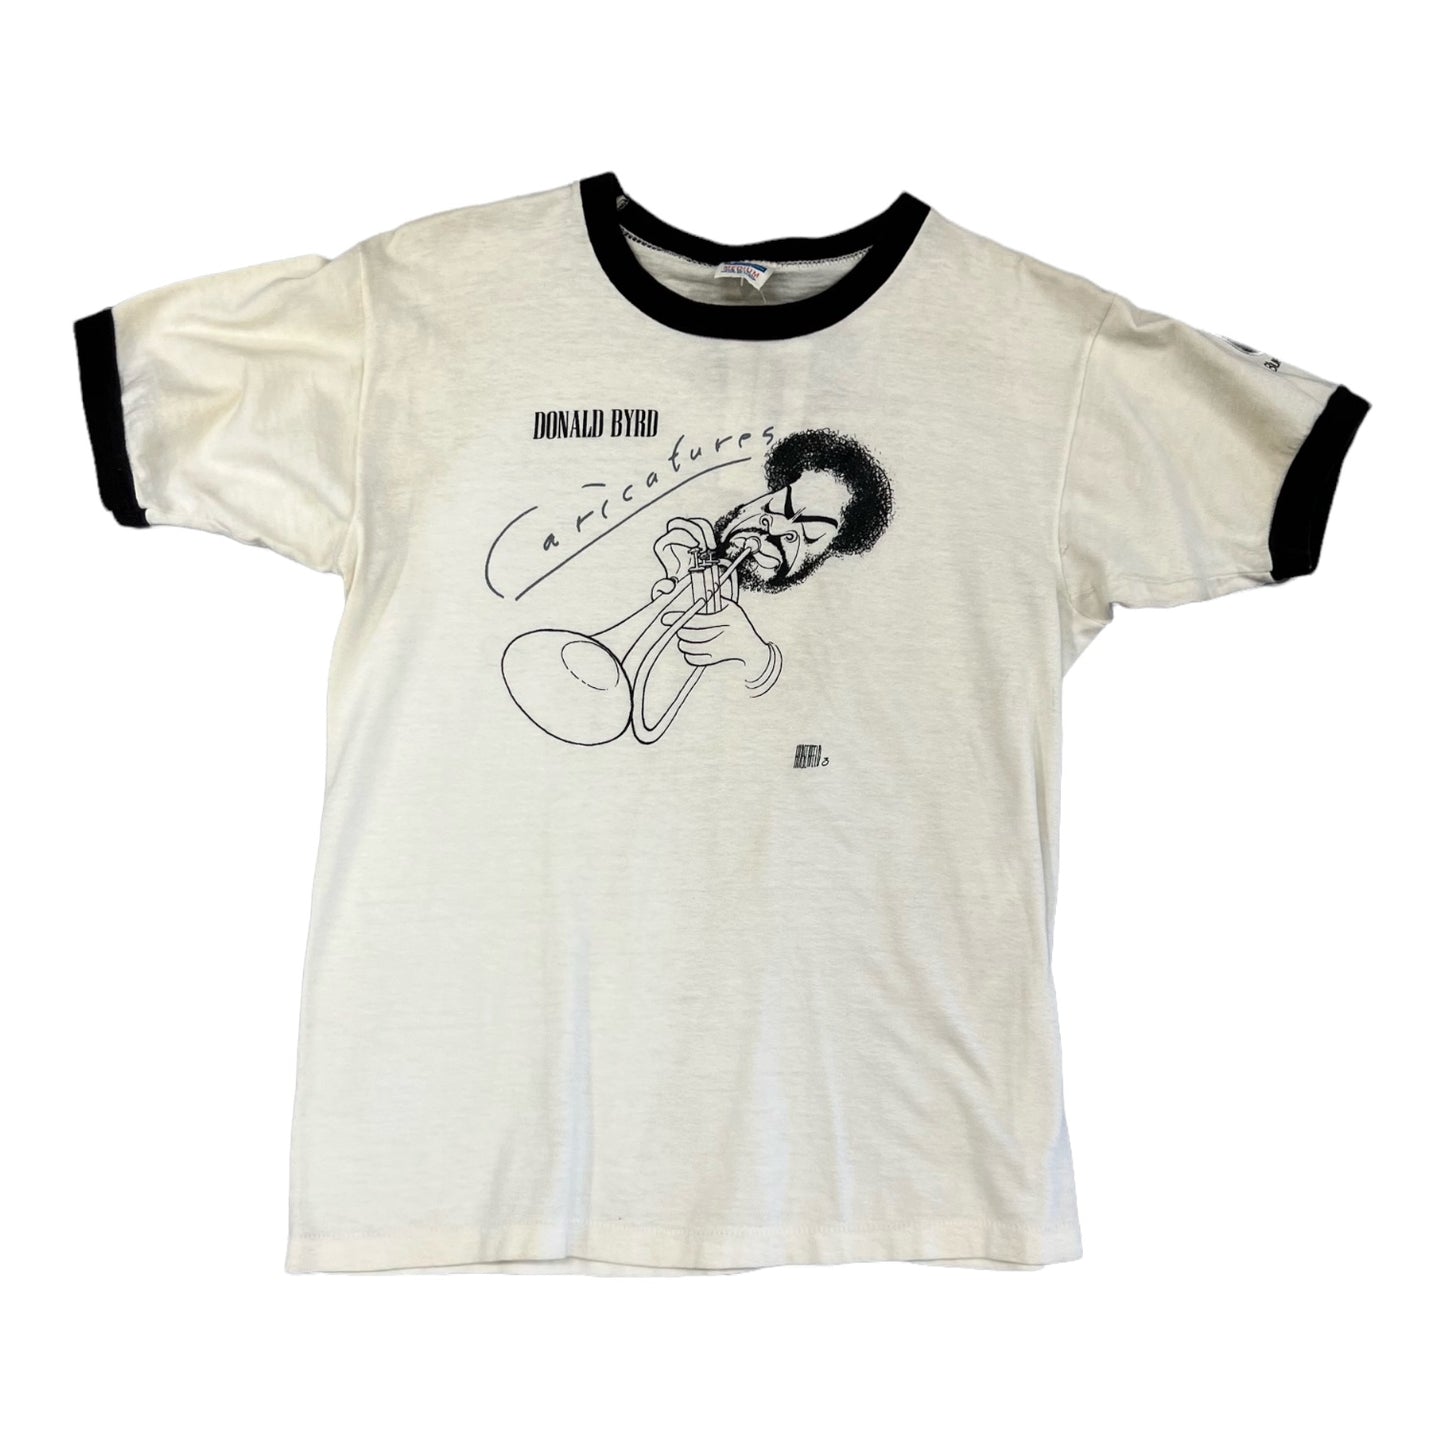 1980's Donald Byrd blue note caricature tee